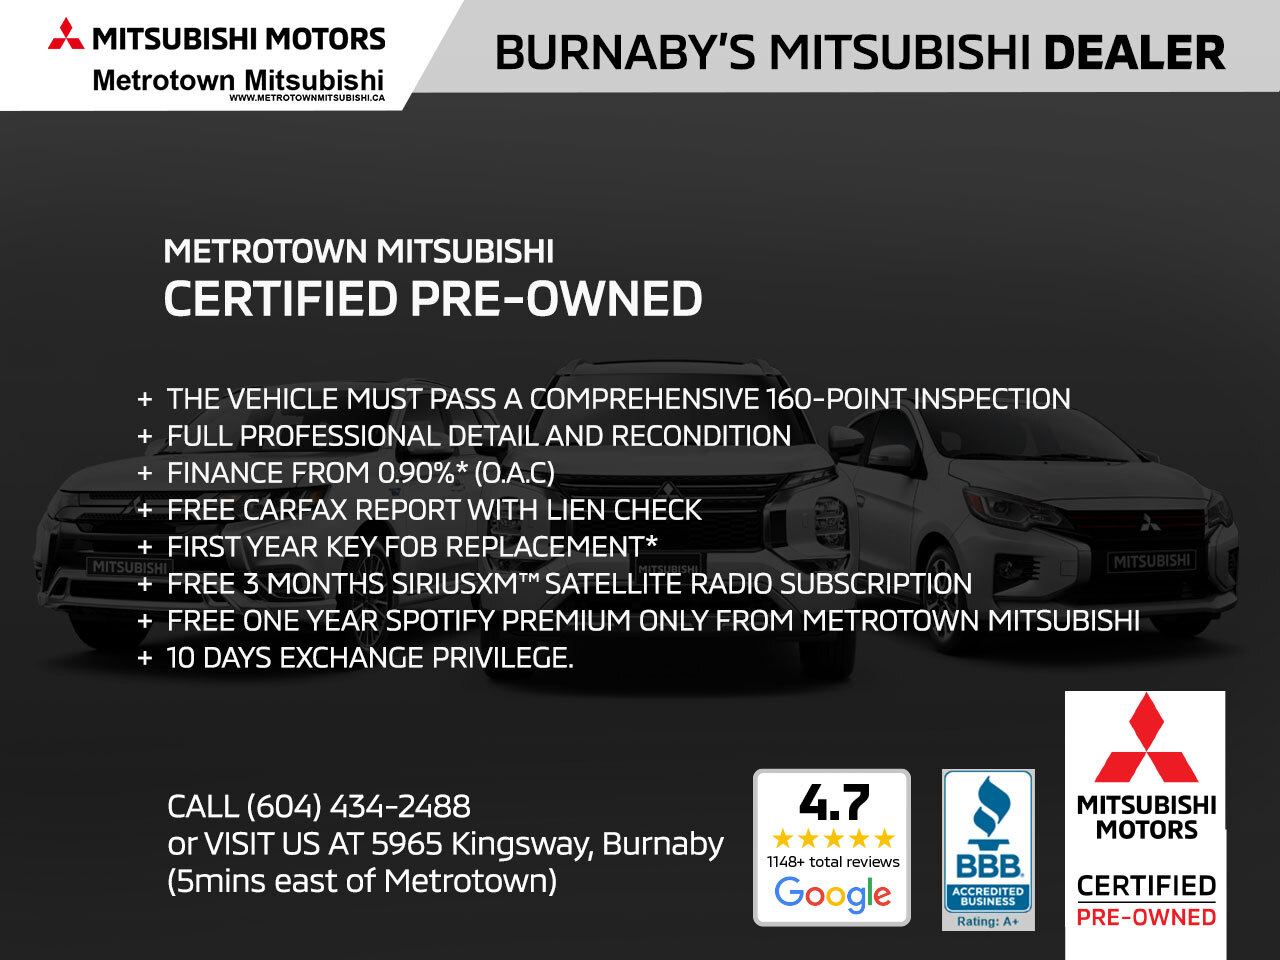 2022 Mitsubishi Outlander PHEV LE S-AWC - No PST - 0% Financing Available*